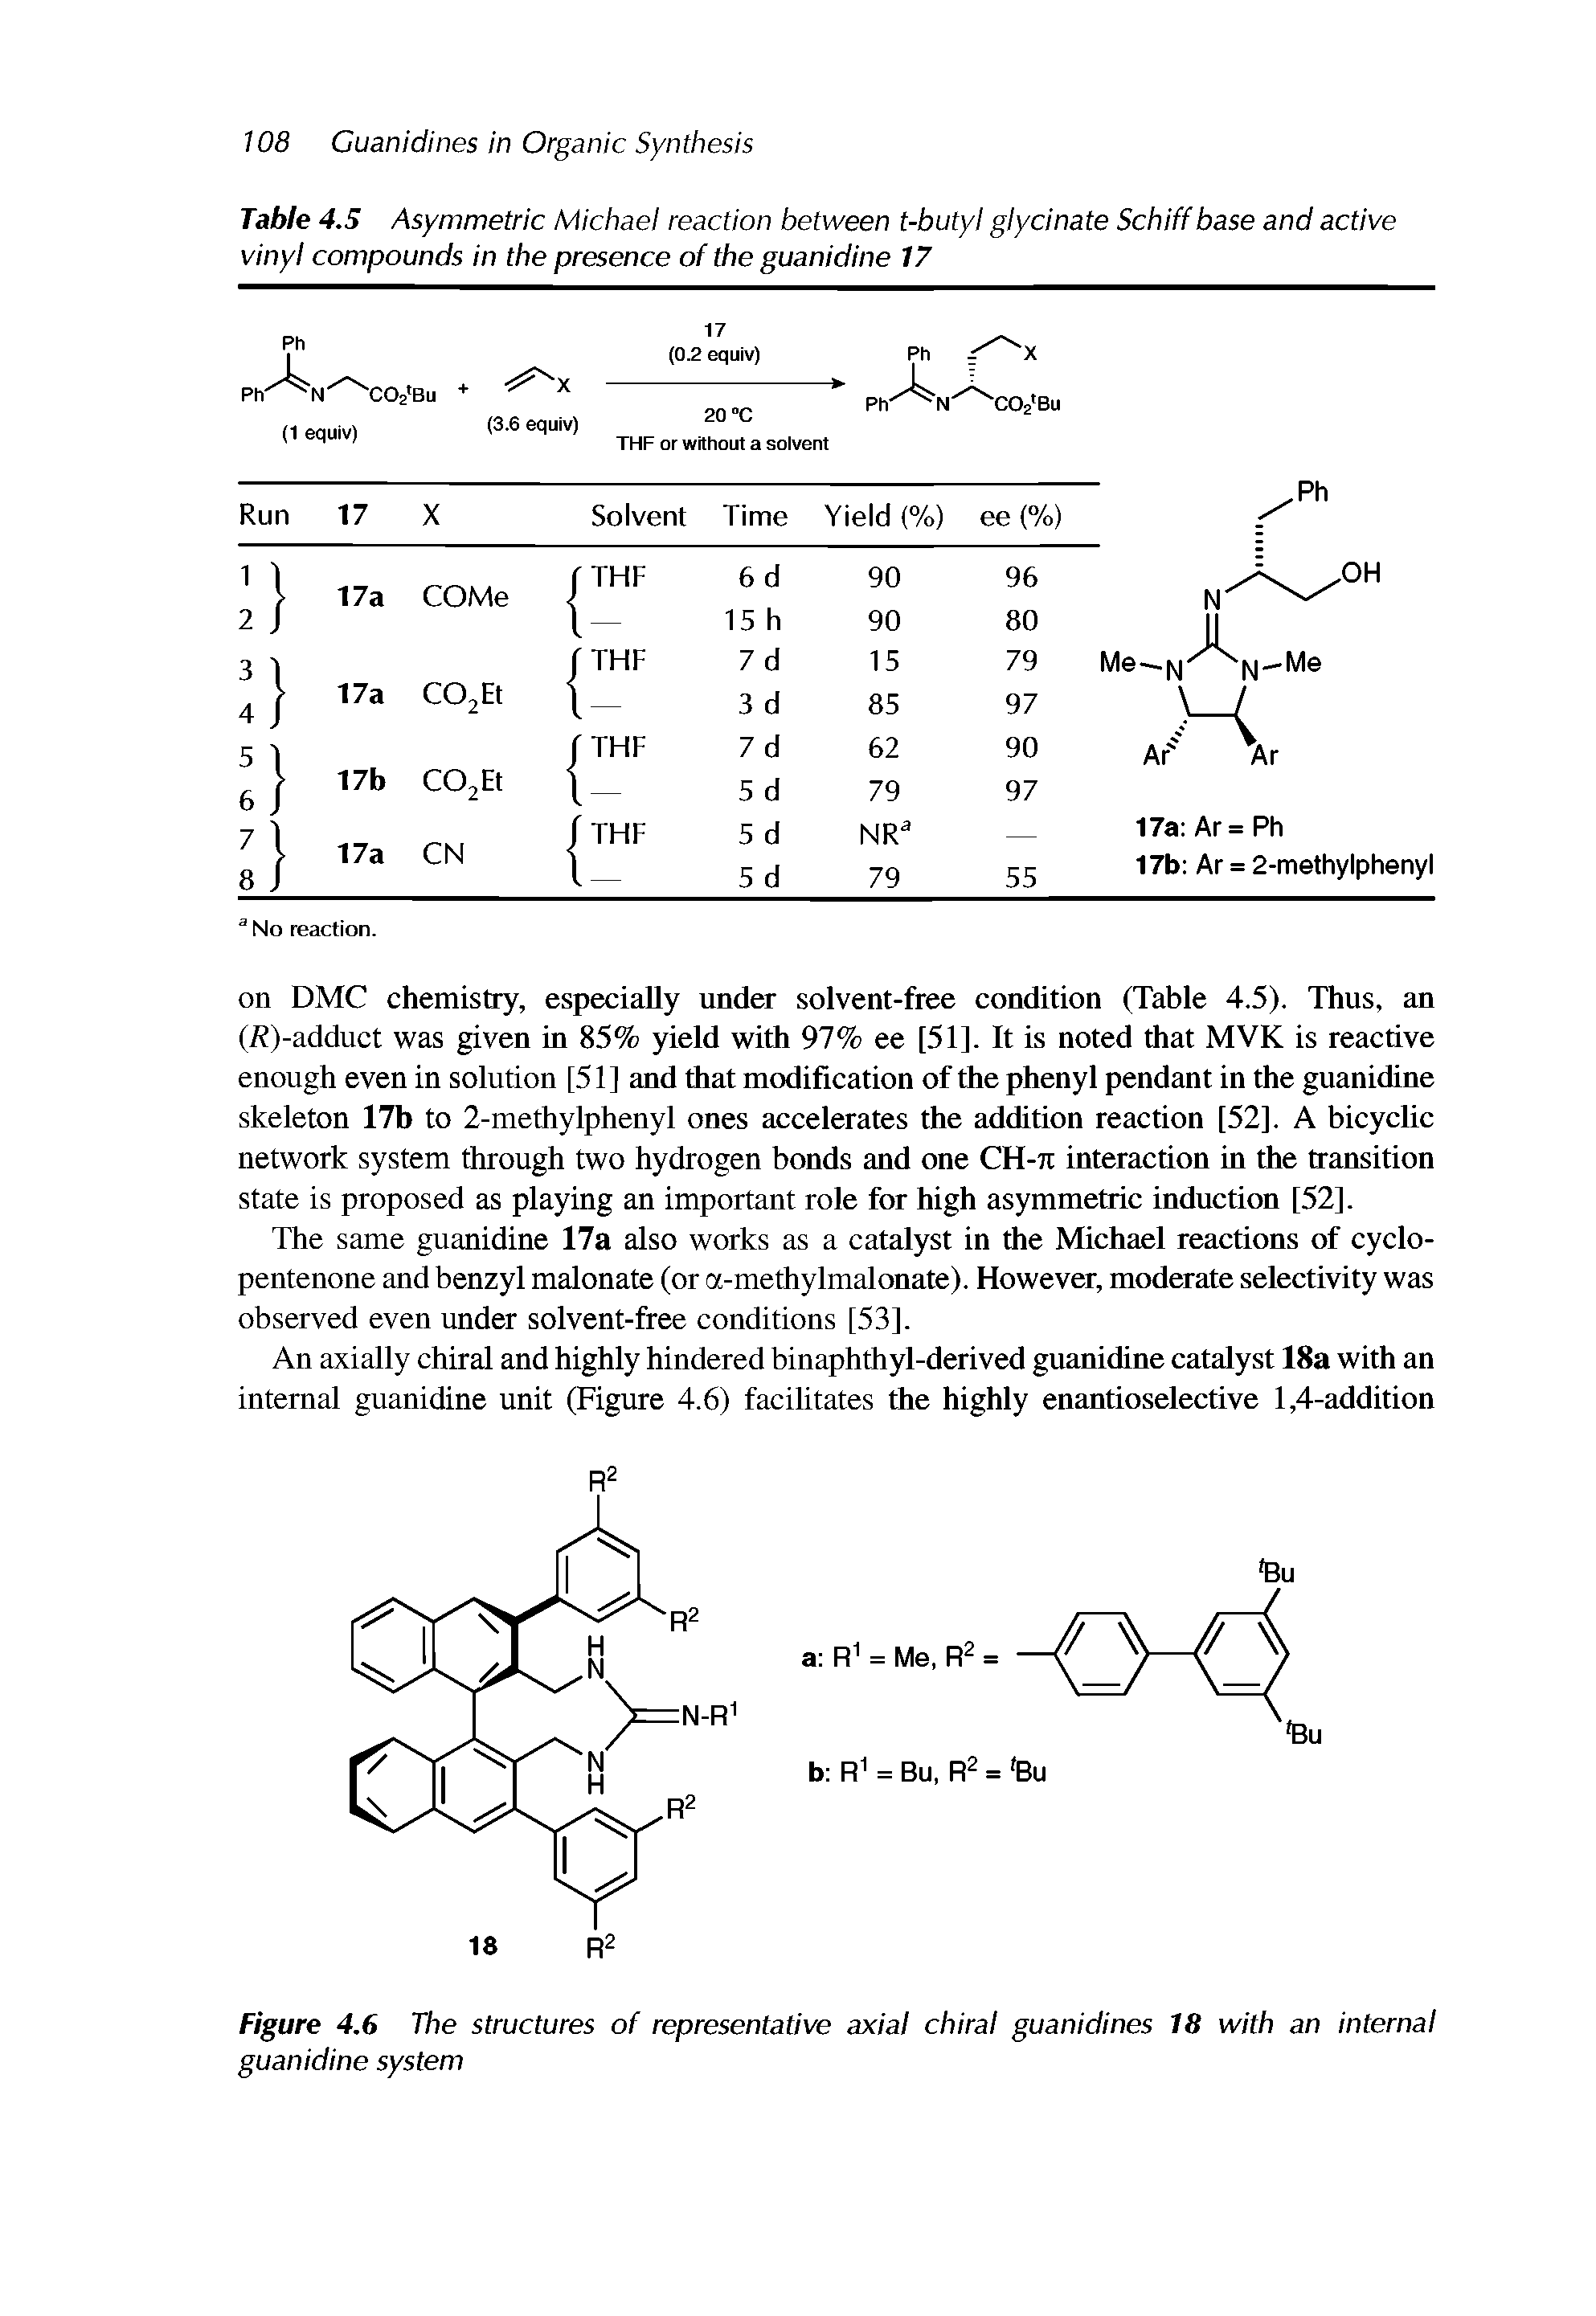 Table 4.5 Asymmetric Michael reaction between t-butyl glycinate Schiffbase and active vinyl compounds in the presence of the guanidine 77...